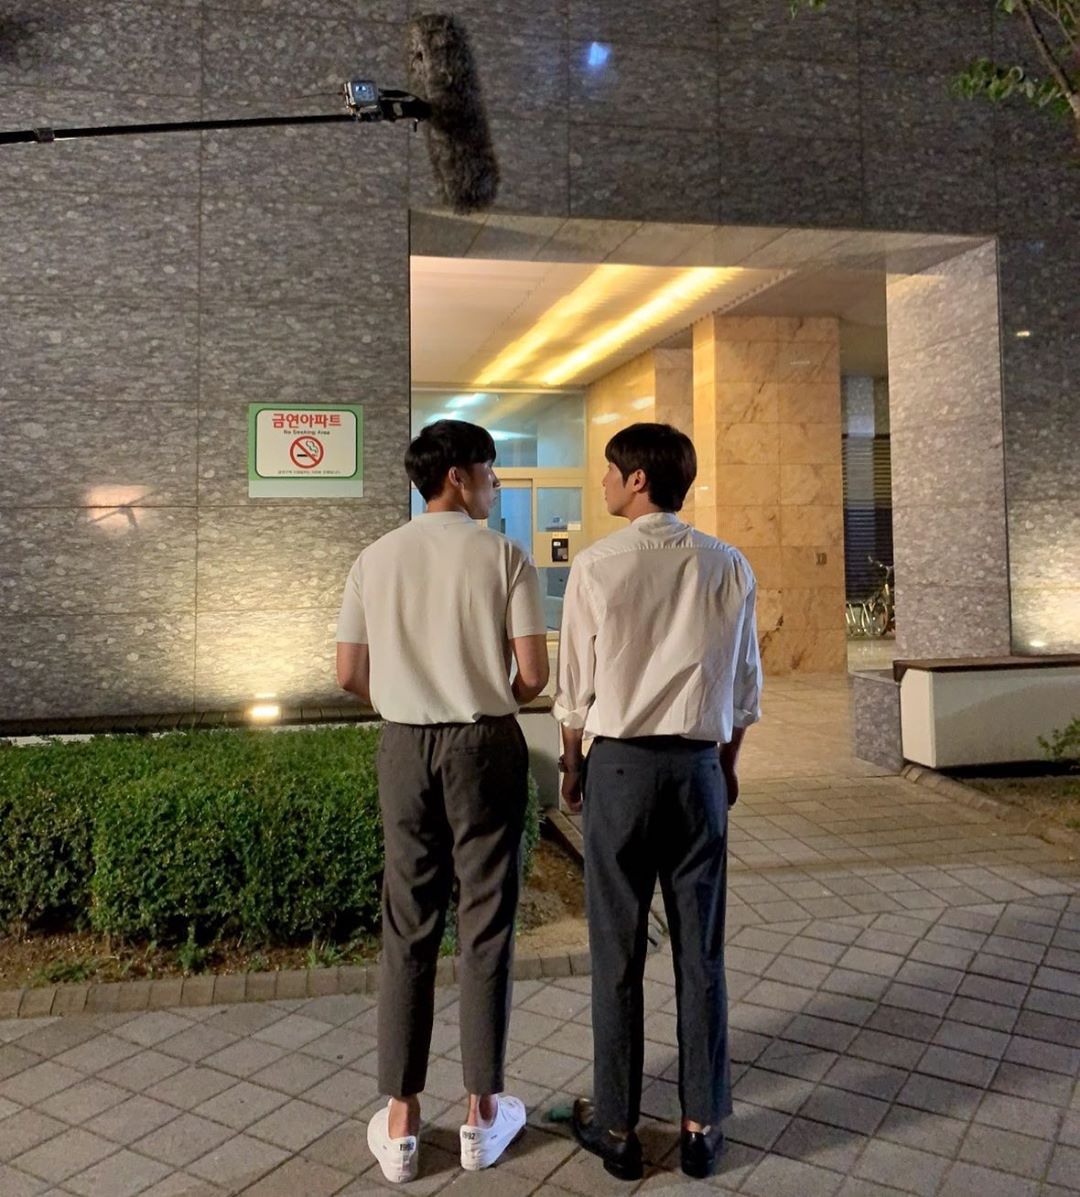 Actor Lee Sang-yeob told the shooting routine.On the 19th, Lee Sang-yeob posted a picture on his instagram with the words HahahahahahahahahahahahahahahahahahahahahahahahahahahahahahahahahahahahahahahahahahahahahahahahahahahahahahahahahahahahahahahahahahahahahahahahahahahahahahaIn the public photos, Lee Sang-yeob is accompanied by Model and Back View standing side by side with Actor Lee.The two are currently appearing on KBS 2TV Weekend drama Ive been to you once.Especially in the drama, Model and Back View, which are similar to each other as brothers, stand out.The netizens responded to the two people, saying, Its like Pat and Matt and Its the best brother chemistry.On the other hand, KBS 2TV Weekend drama Ive Goed Once is broadcast every Saturday and Sunday at 7:55 pm.Photo: Lee Sang-yeob Instagram